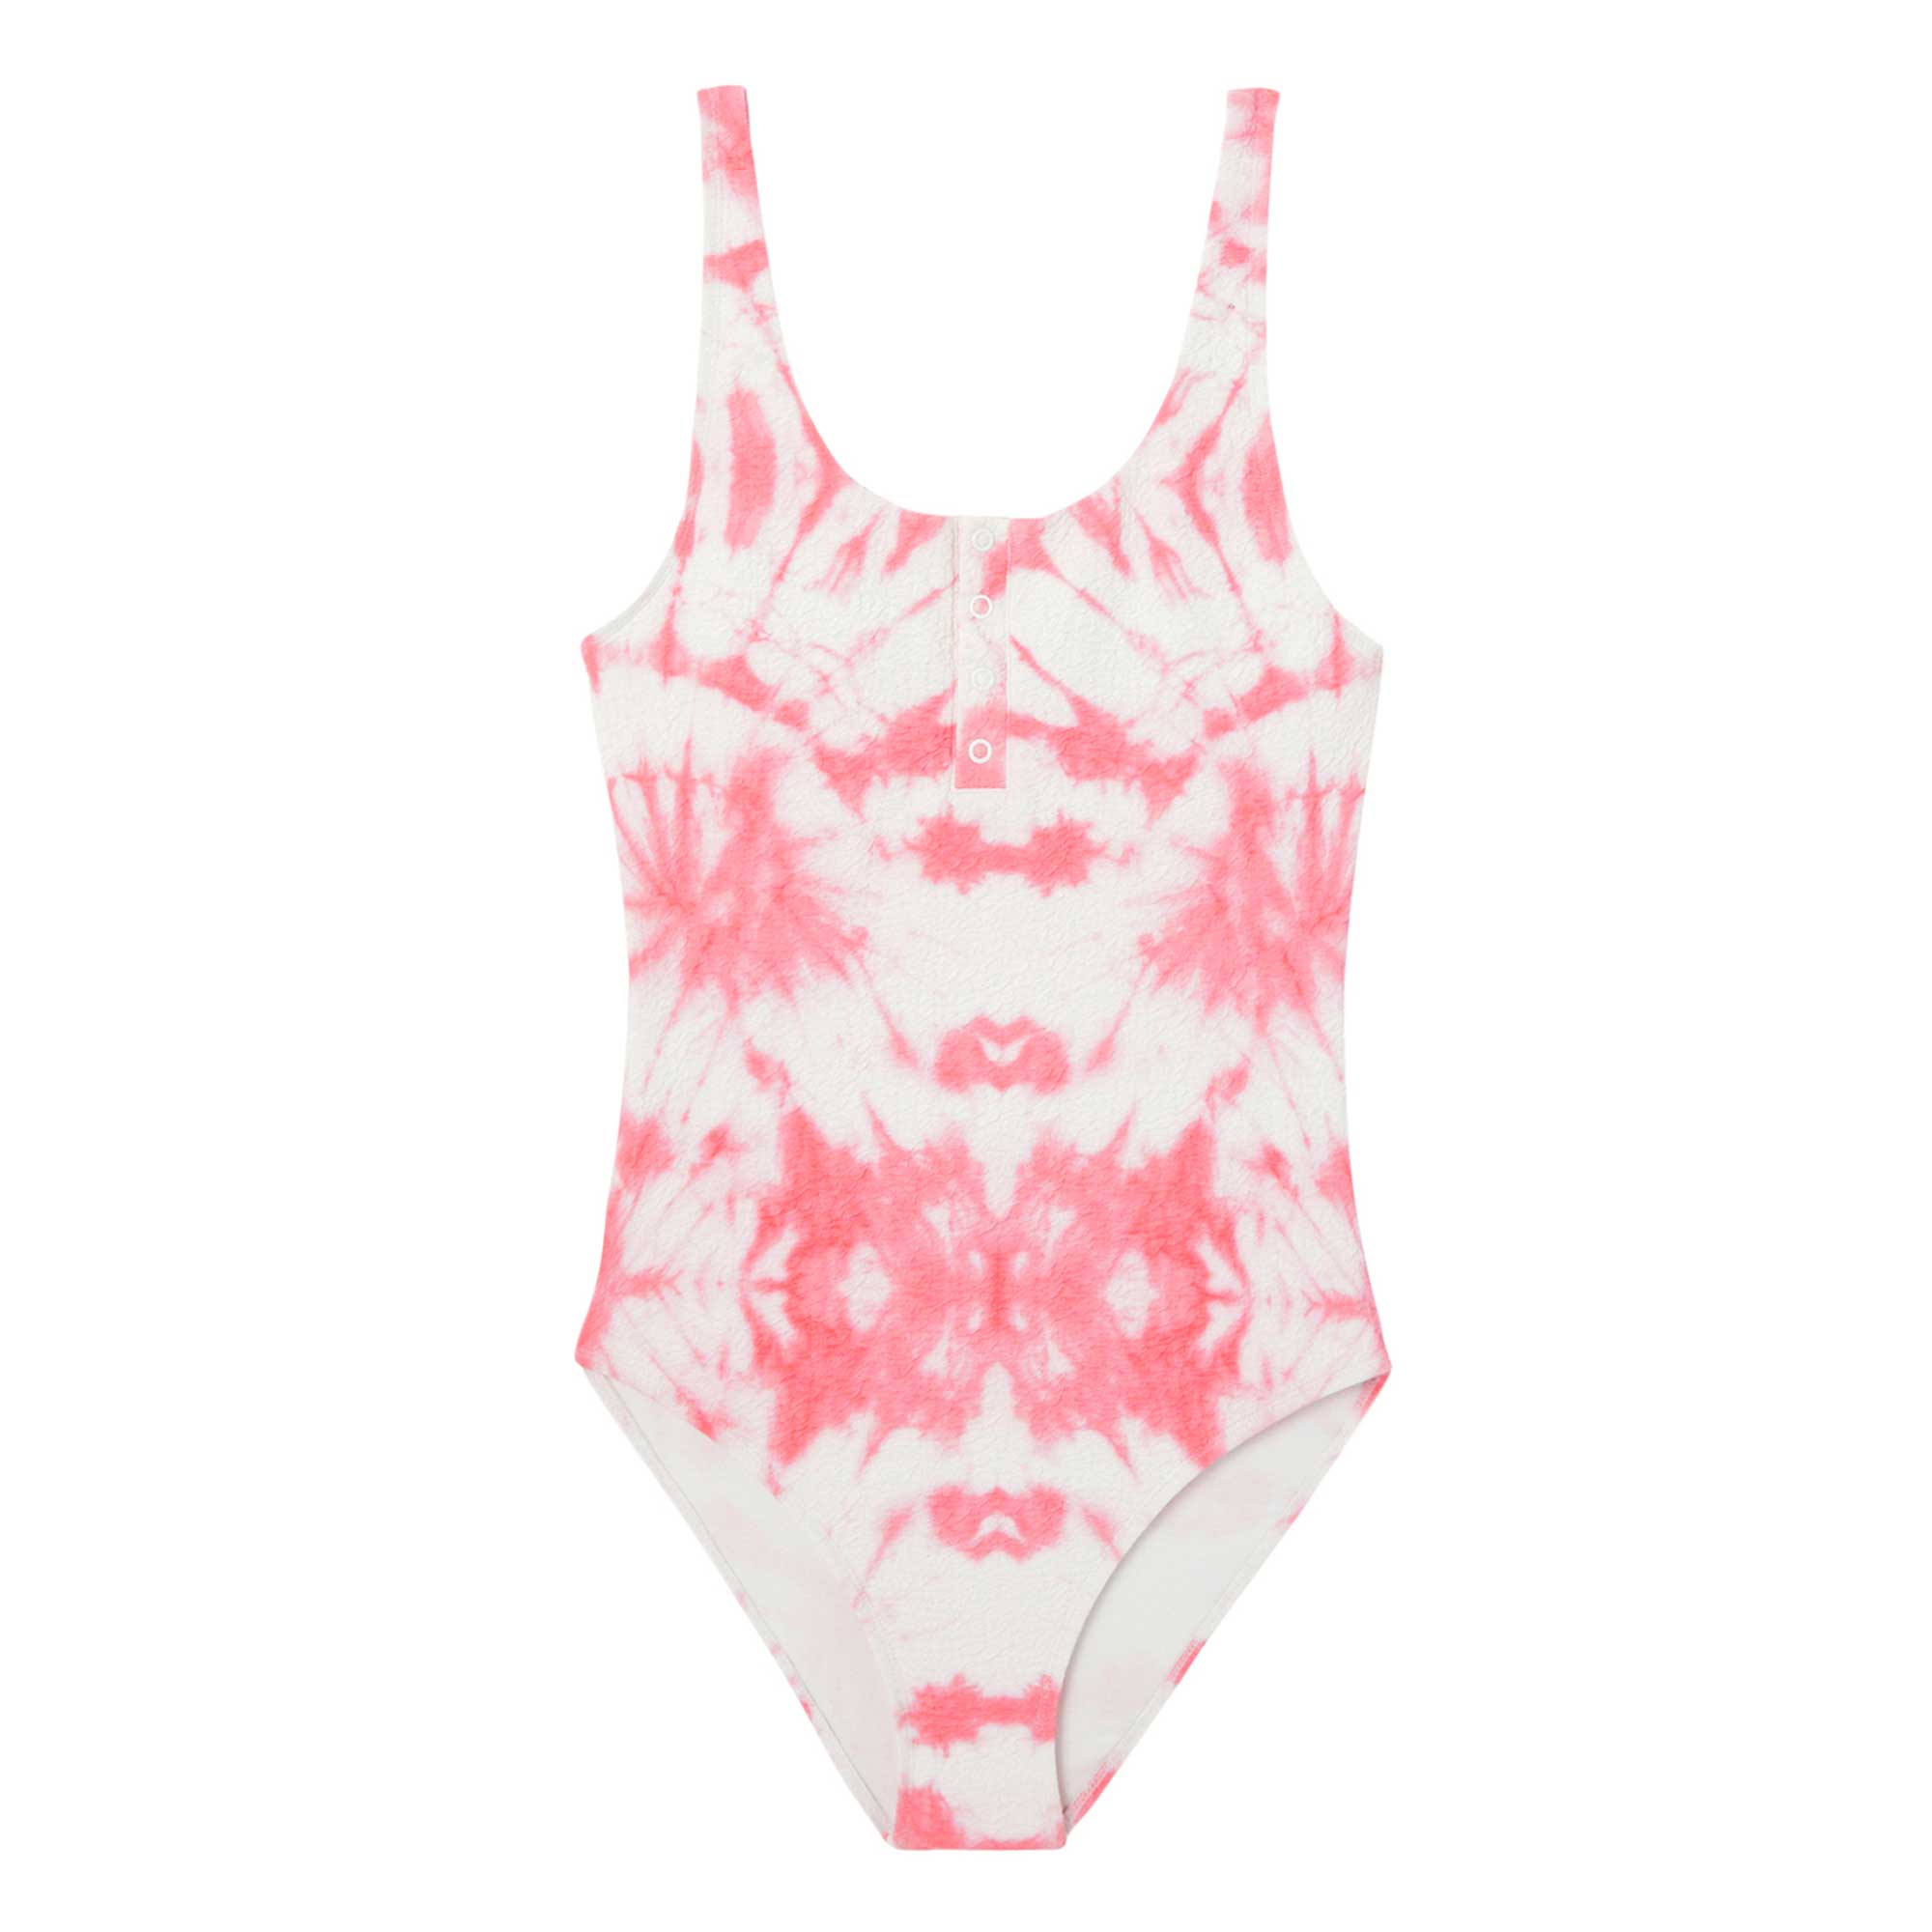 Girl one piece swimsuit, coral tie and dye